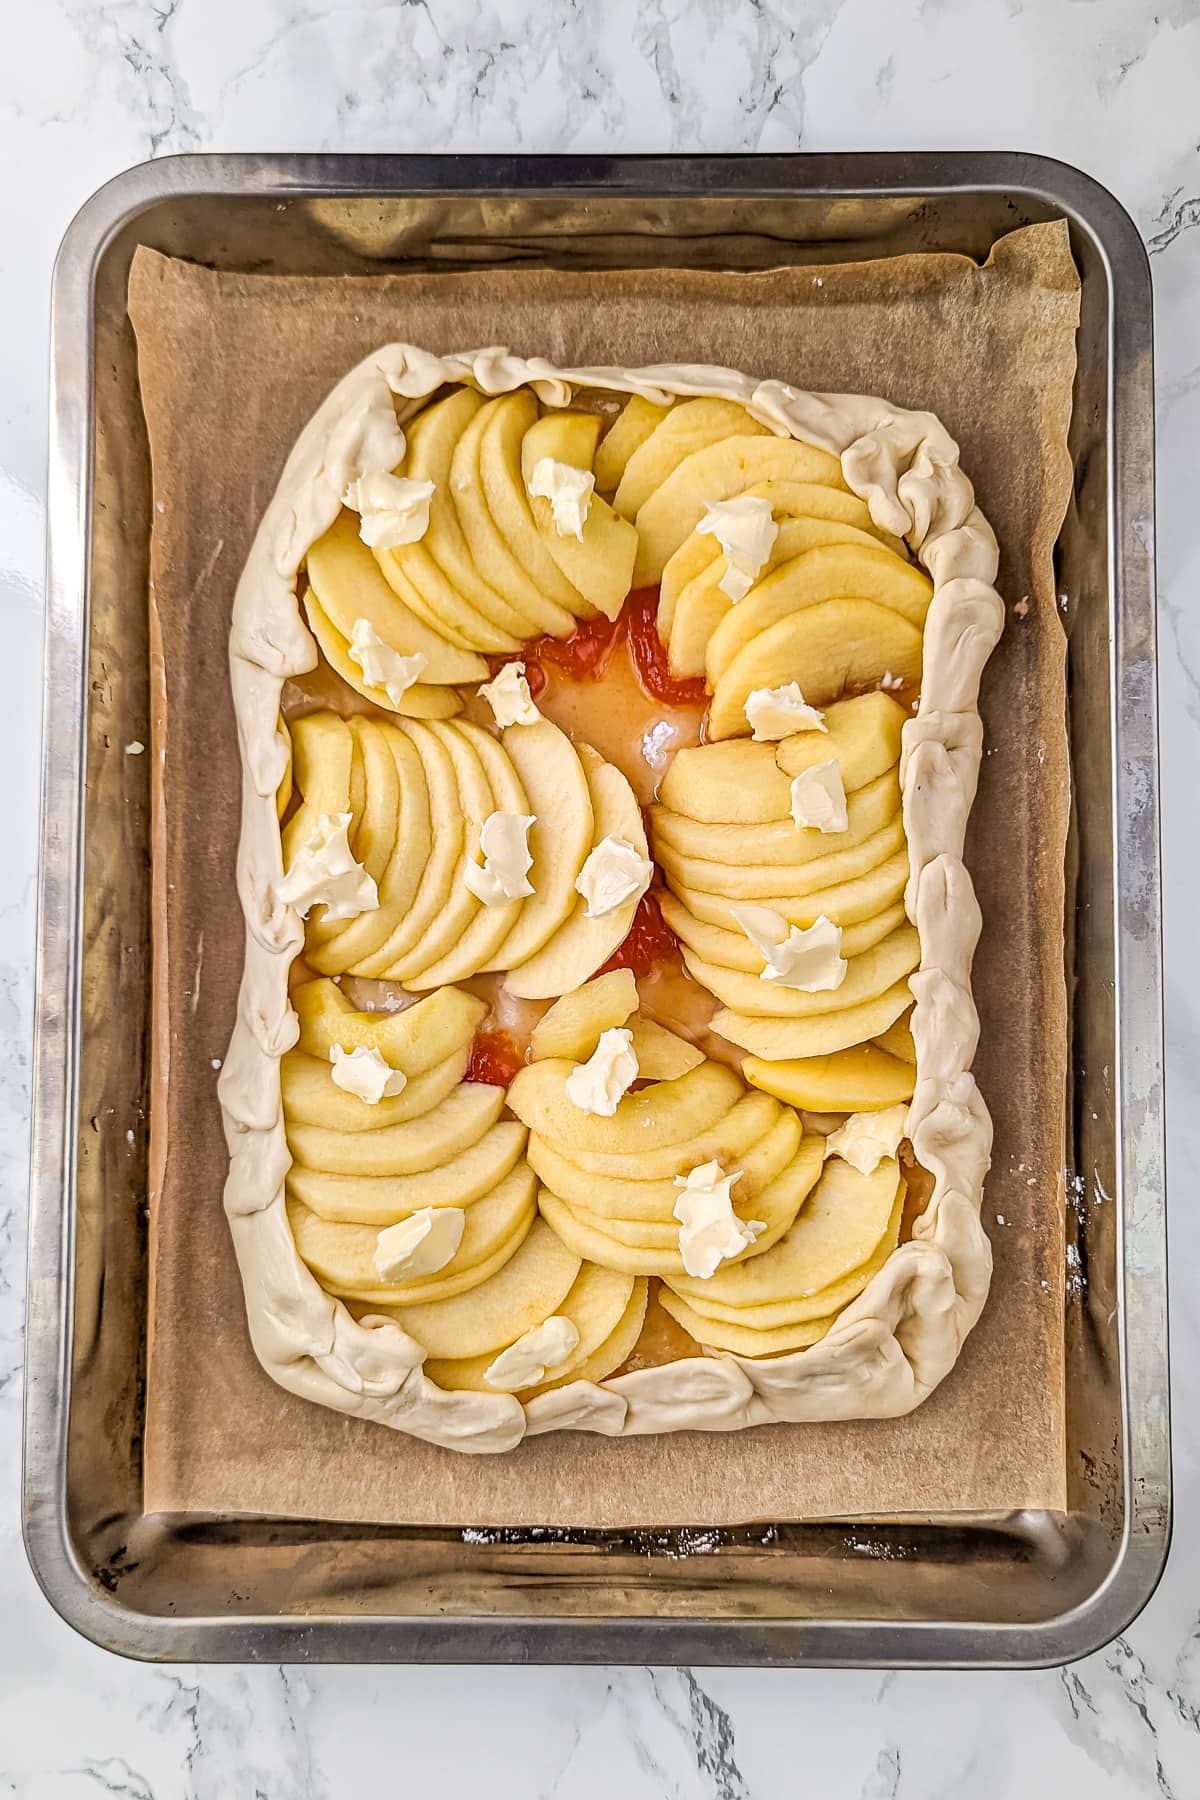 Apple tart assembly completed with layers of apple slices and dots of butter on top, ready to bake.